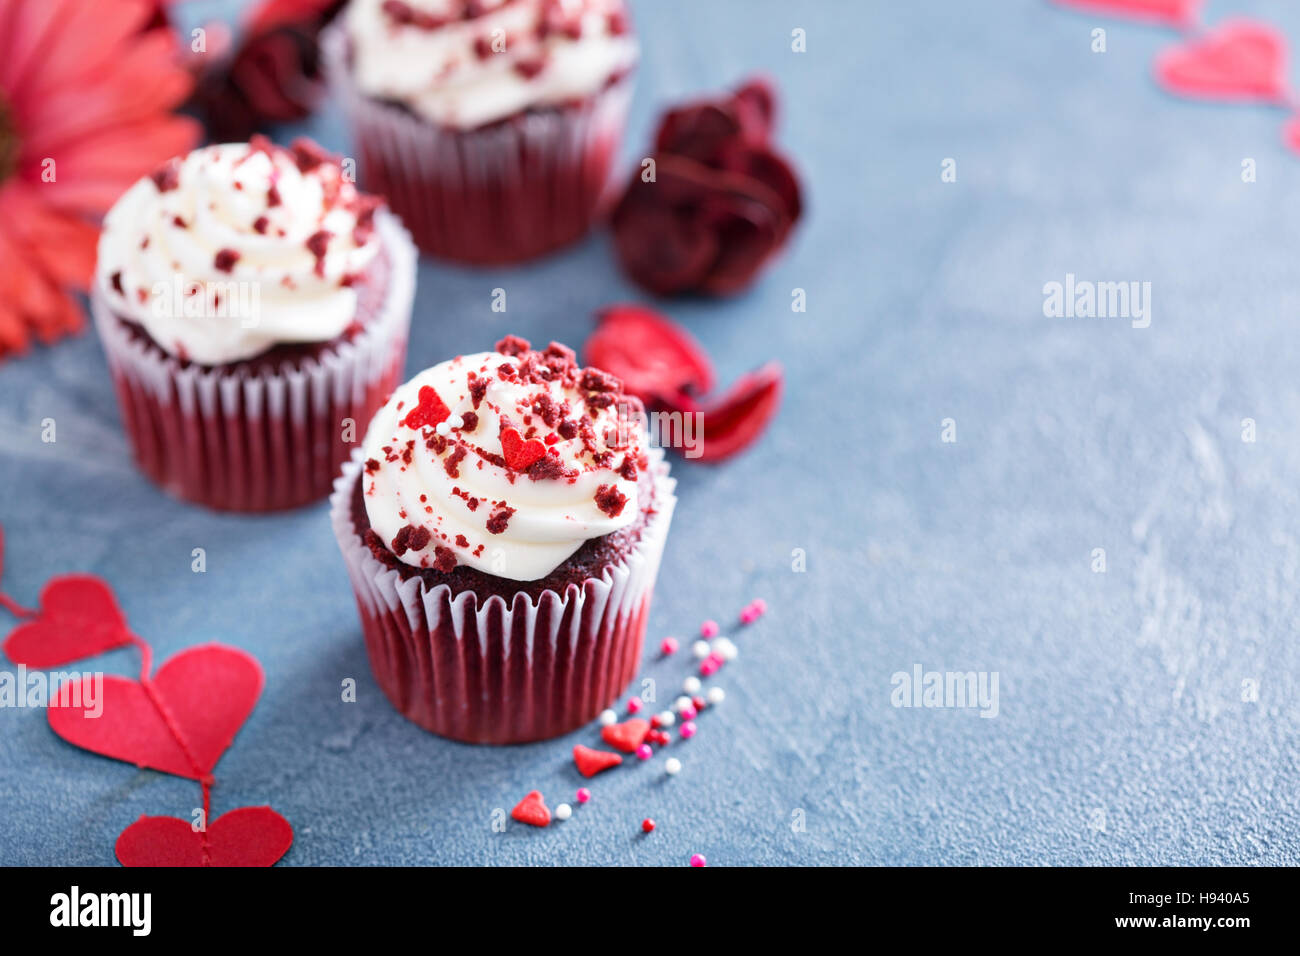 Red velvet cupcakes for Valentines Day Stock Photo - Alamy